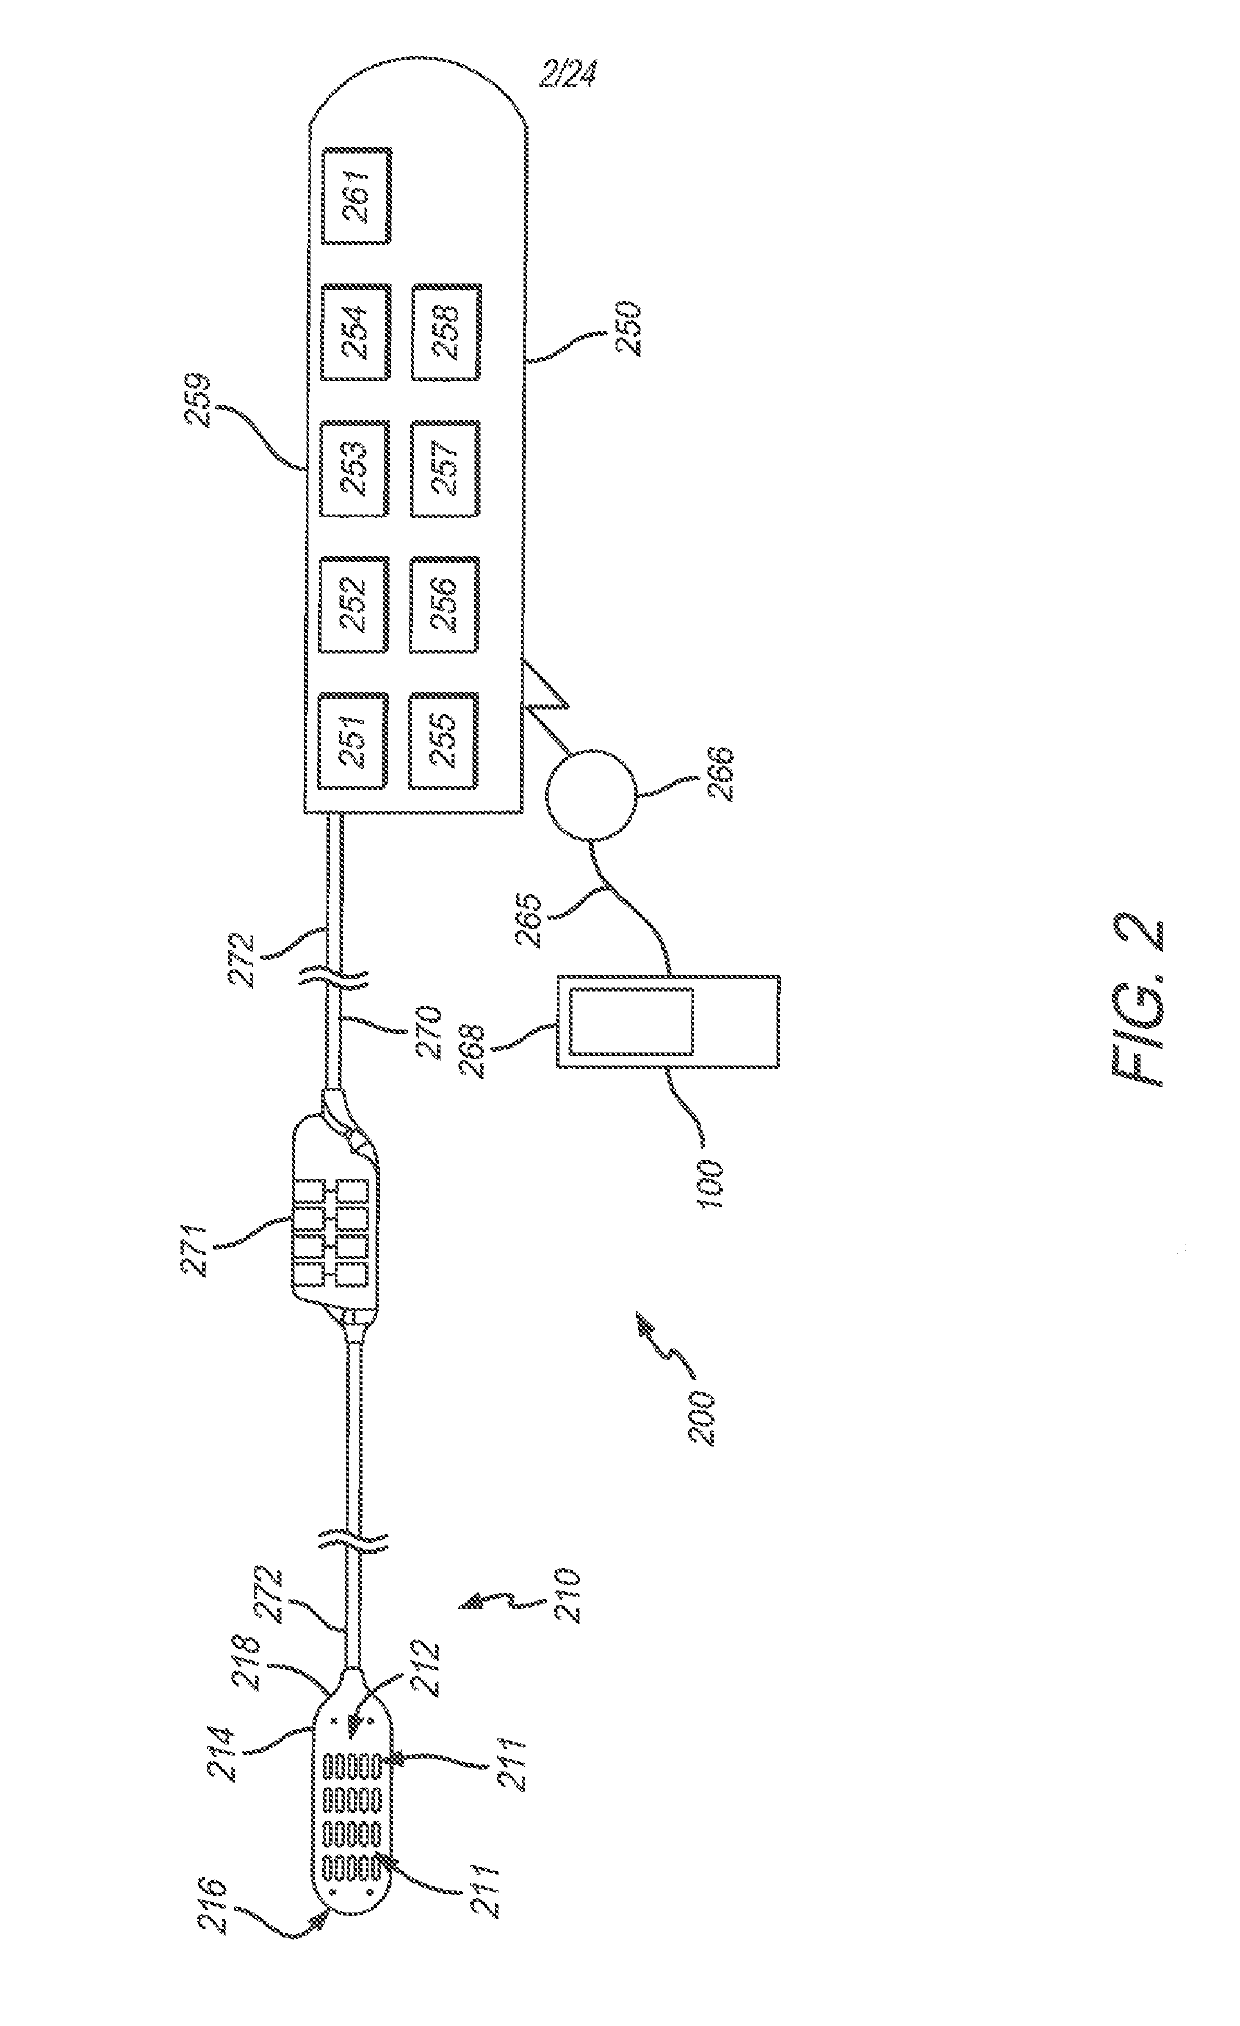 Spinal cord stimulation guidance system and method of use